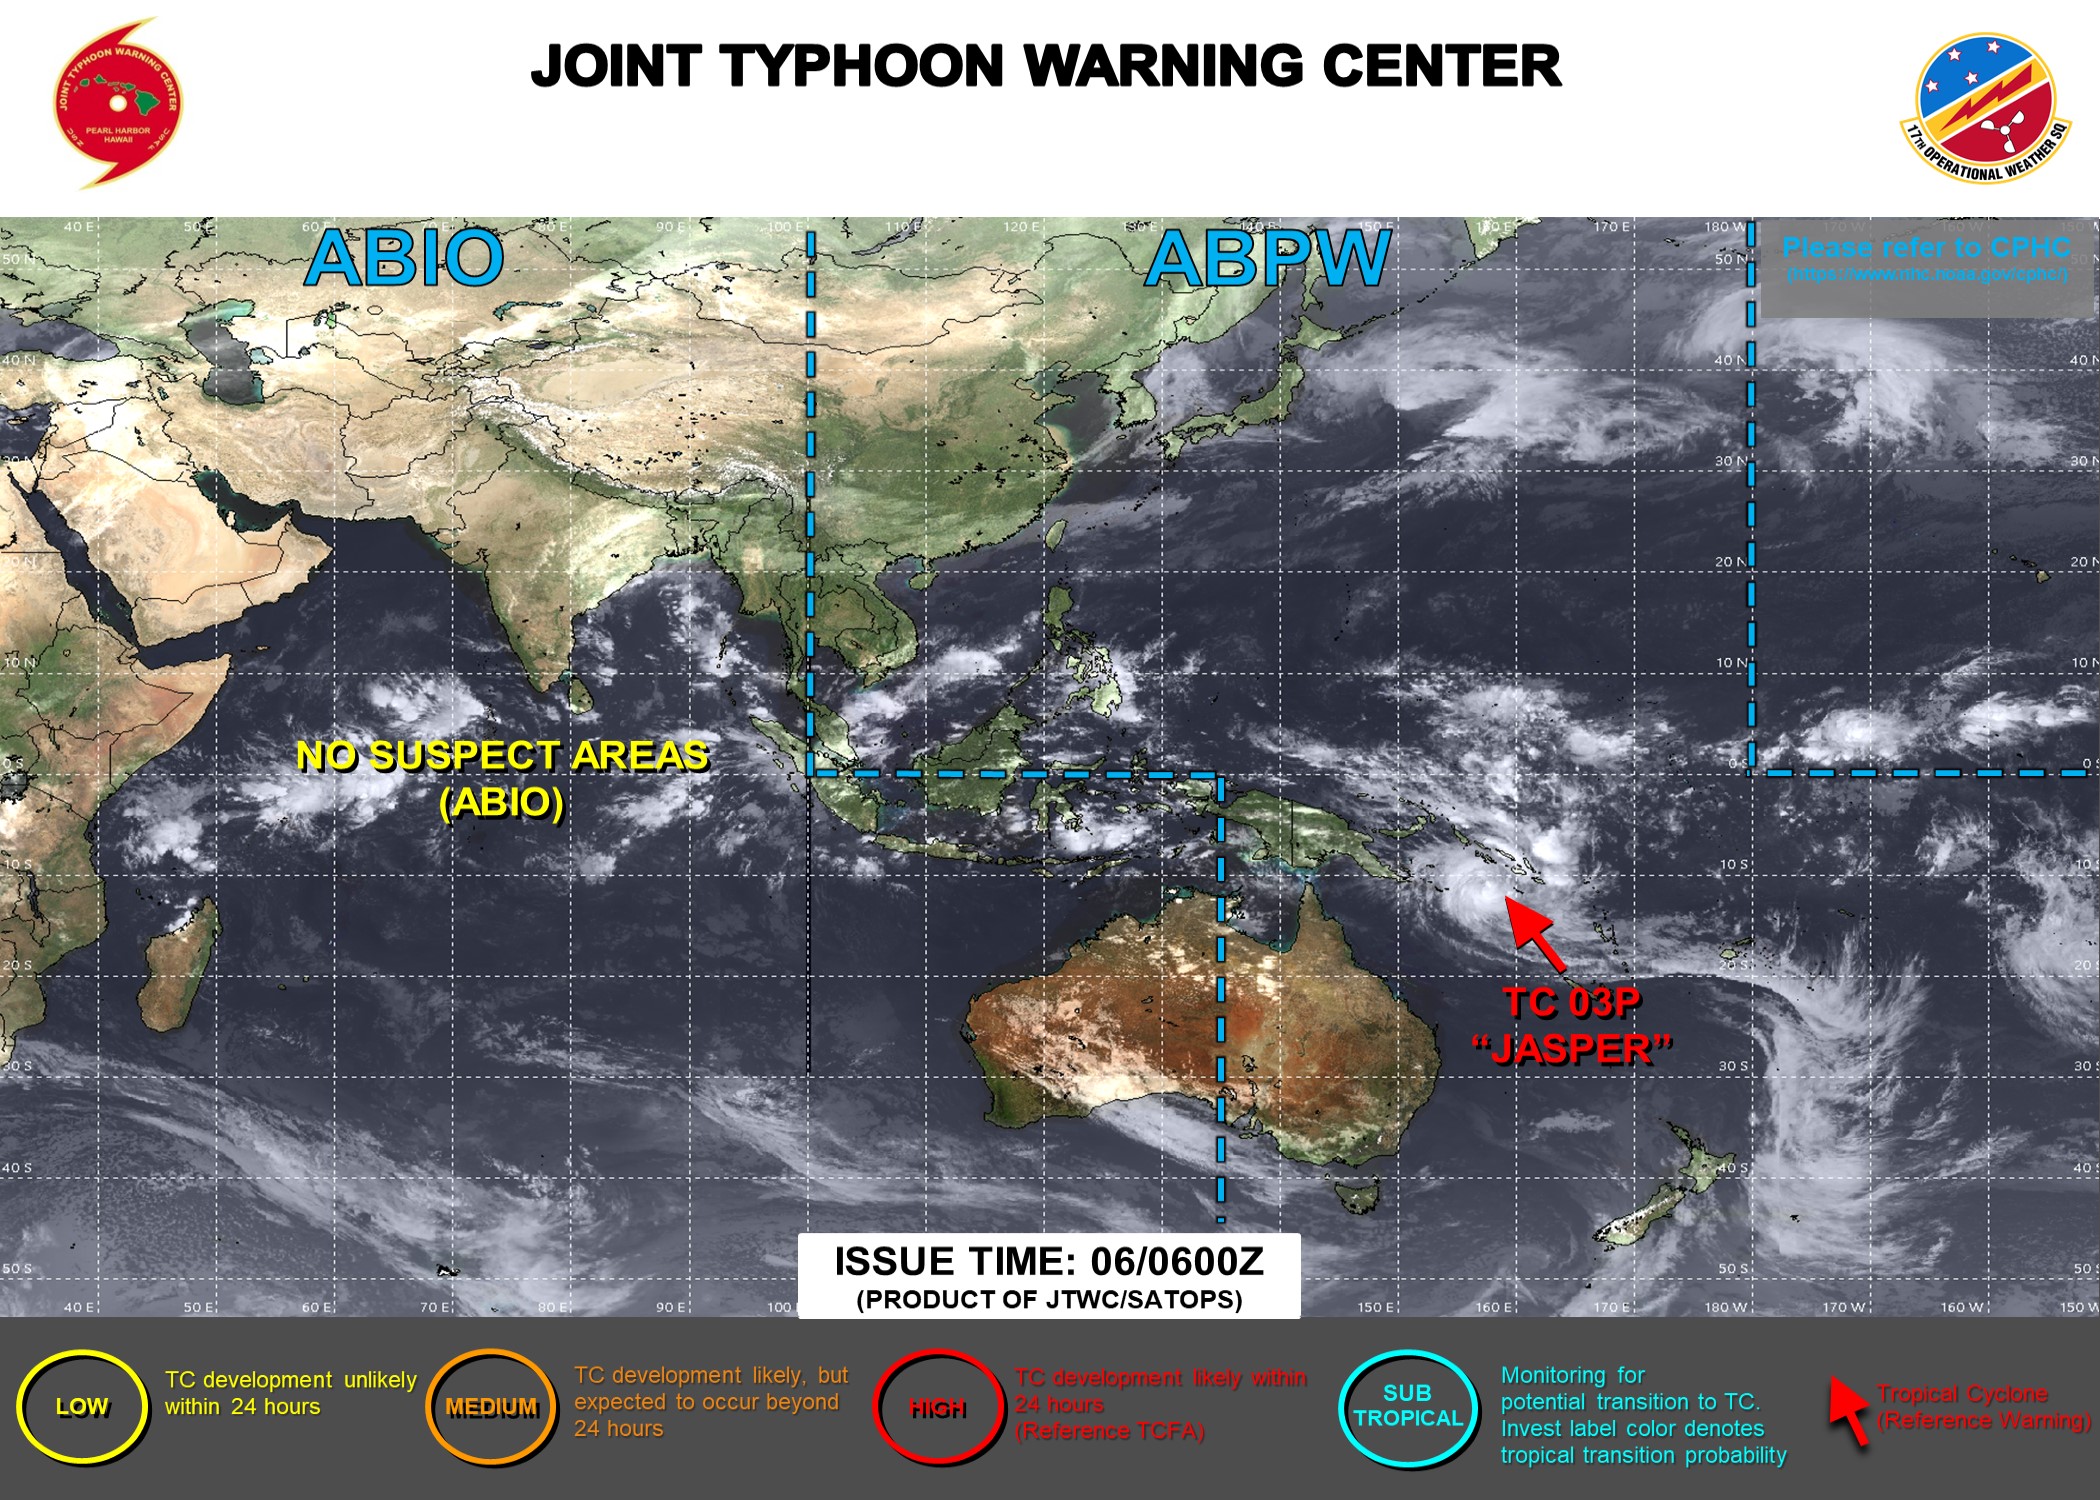 JTWC IS ISSUING 6HOURLY WARNINGS AND 3HOURLY SATELLITE BULLETINS ON TC 03P(JASPER). 3HOURLY SATELLITE BULLETINS ON THE REMNANTS OF TC 08B(MICHAUNG) WERE DISCONTINUED AT 06/1130UTC.